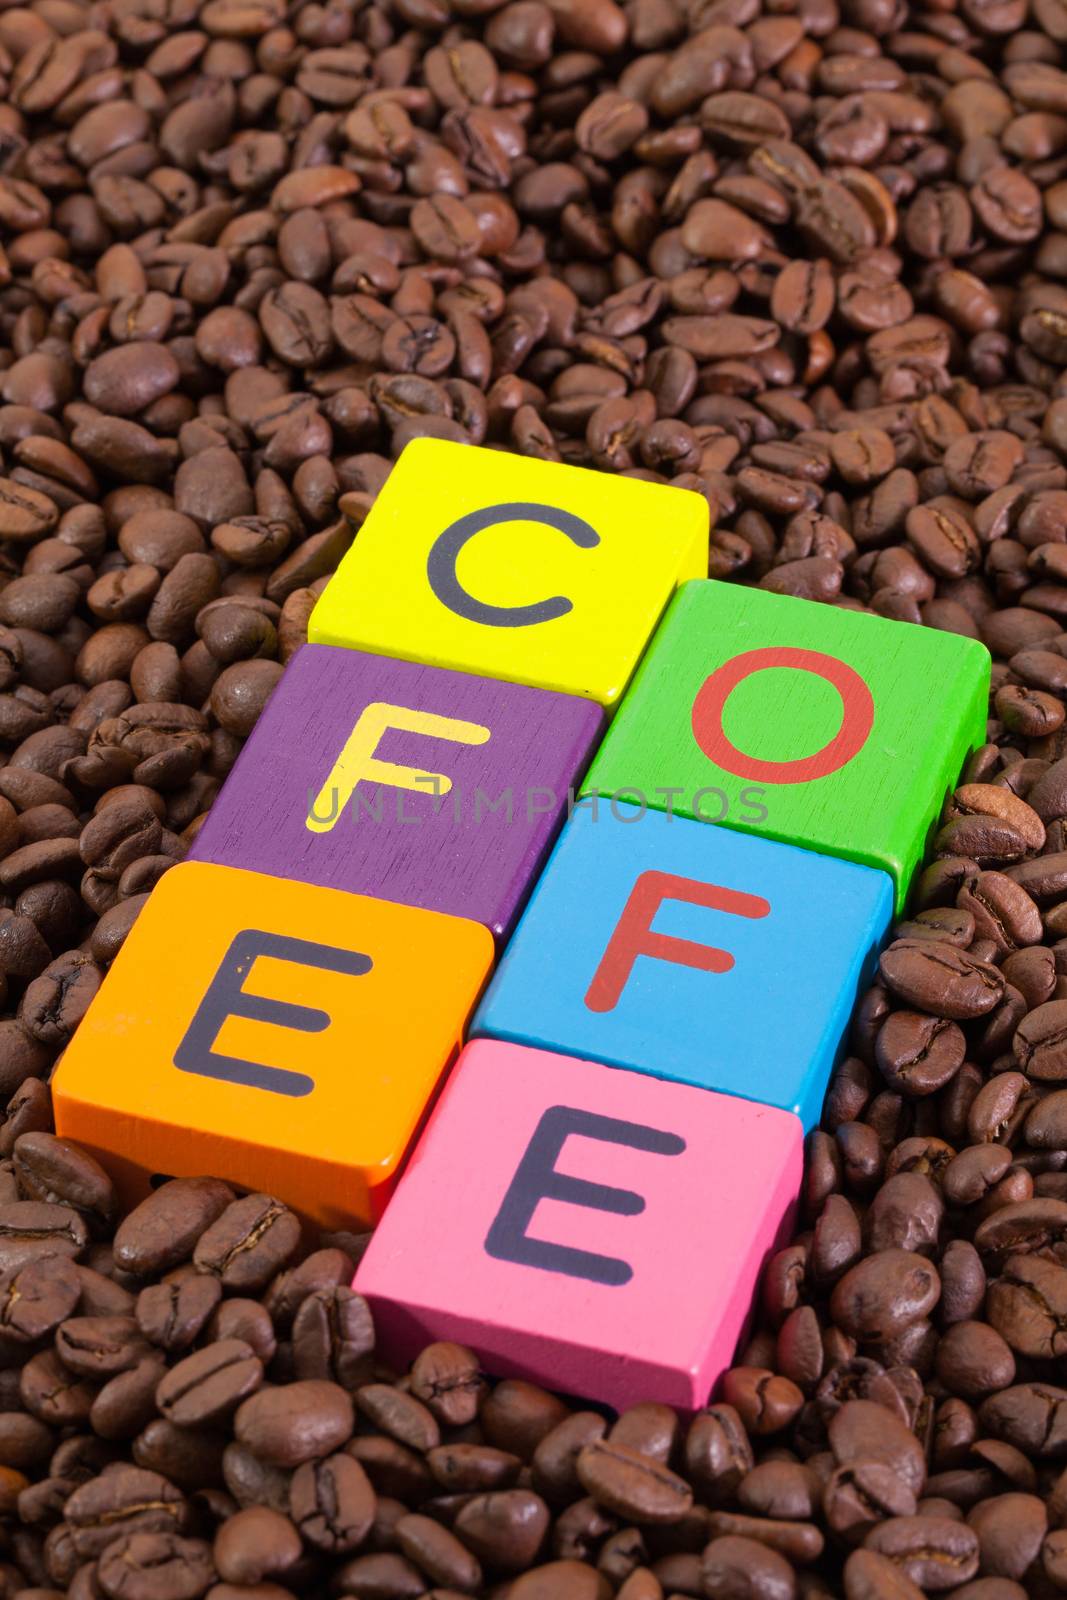 Colored children's cubes and coffee beans